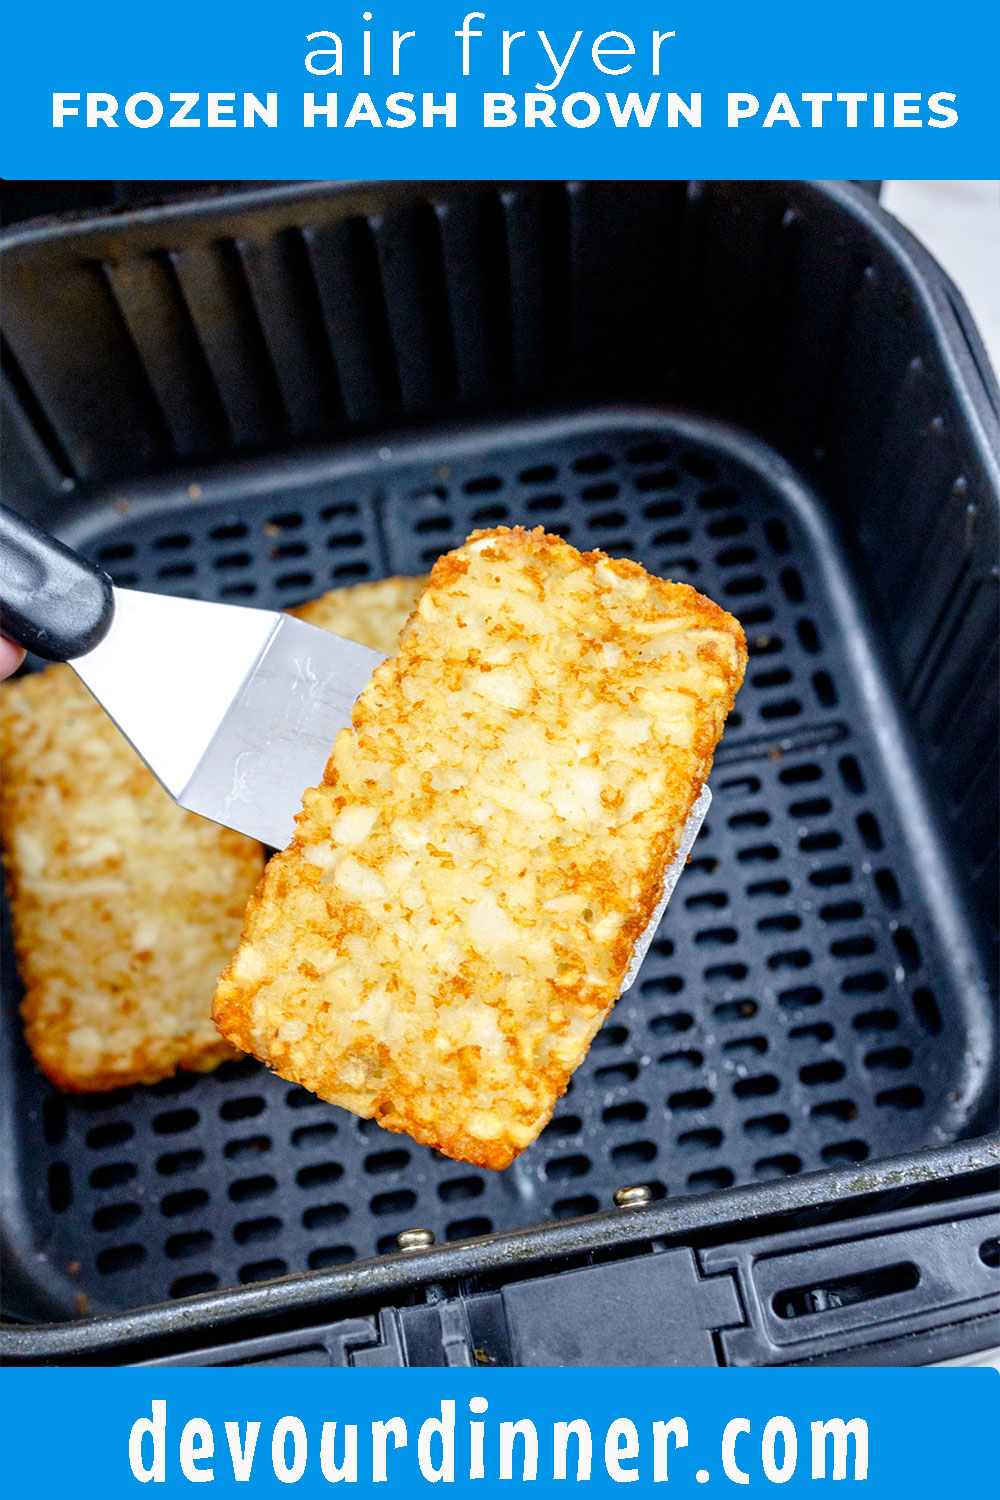 Air Fryer Hash Brown Patties are a crispy, delightful side dish or main breakfast attraction, made with minimal effort and time! Whether you're preparing a quick breakfast for a busy day ahead or looking for a simple yet satisfying snack, these delicious hash browns will not disappoint!